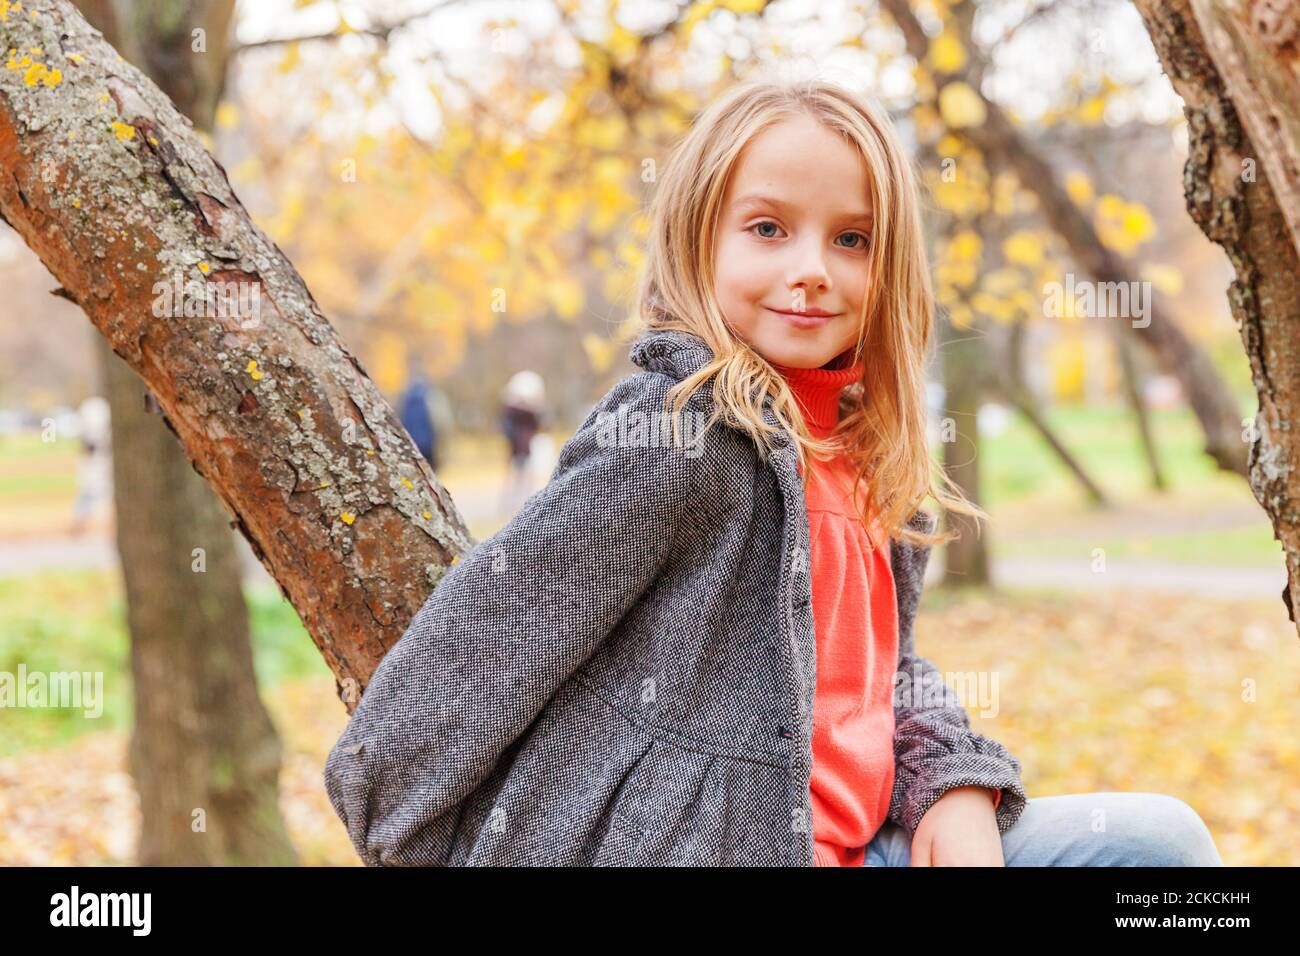 Happy young girl smiling and sitting on tree in beautiful autumn park on nature walks outdoors. Little child playing in autumn fall orange yellow background. Hello autumn concept Stock Photo